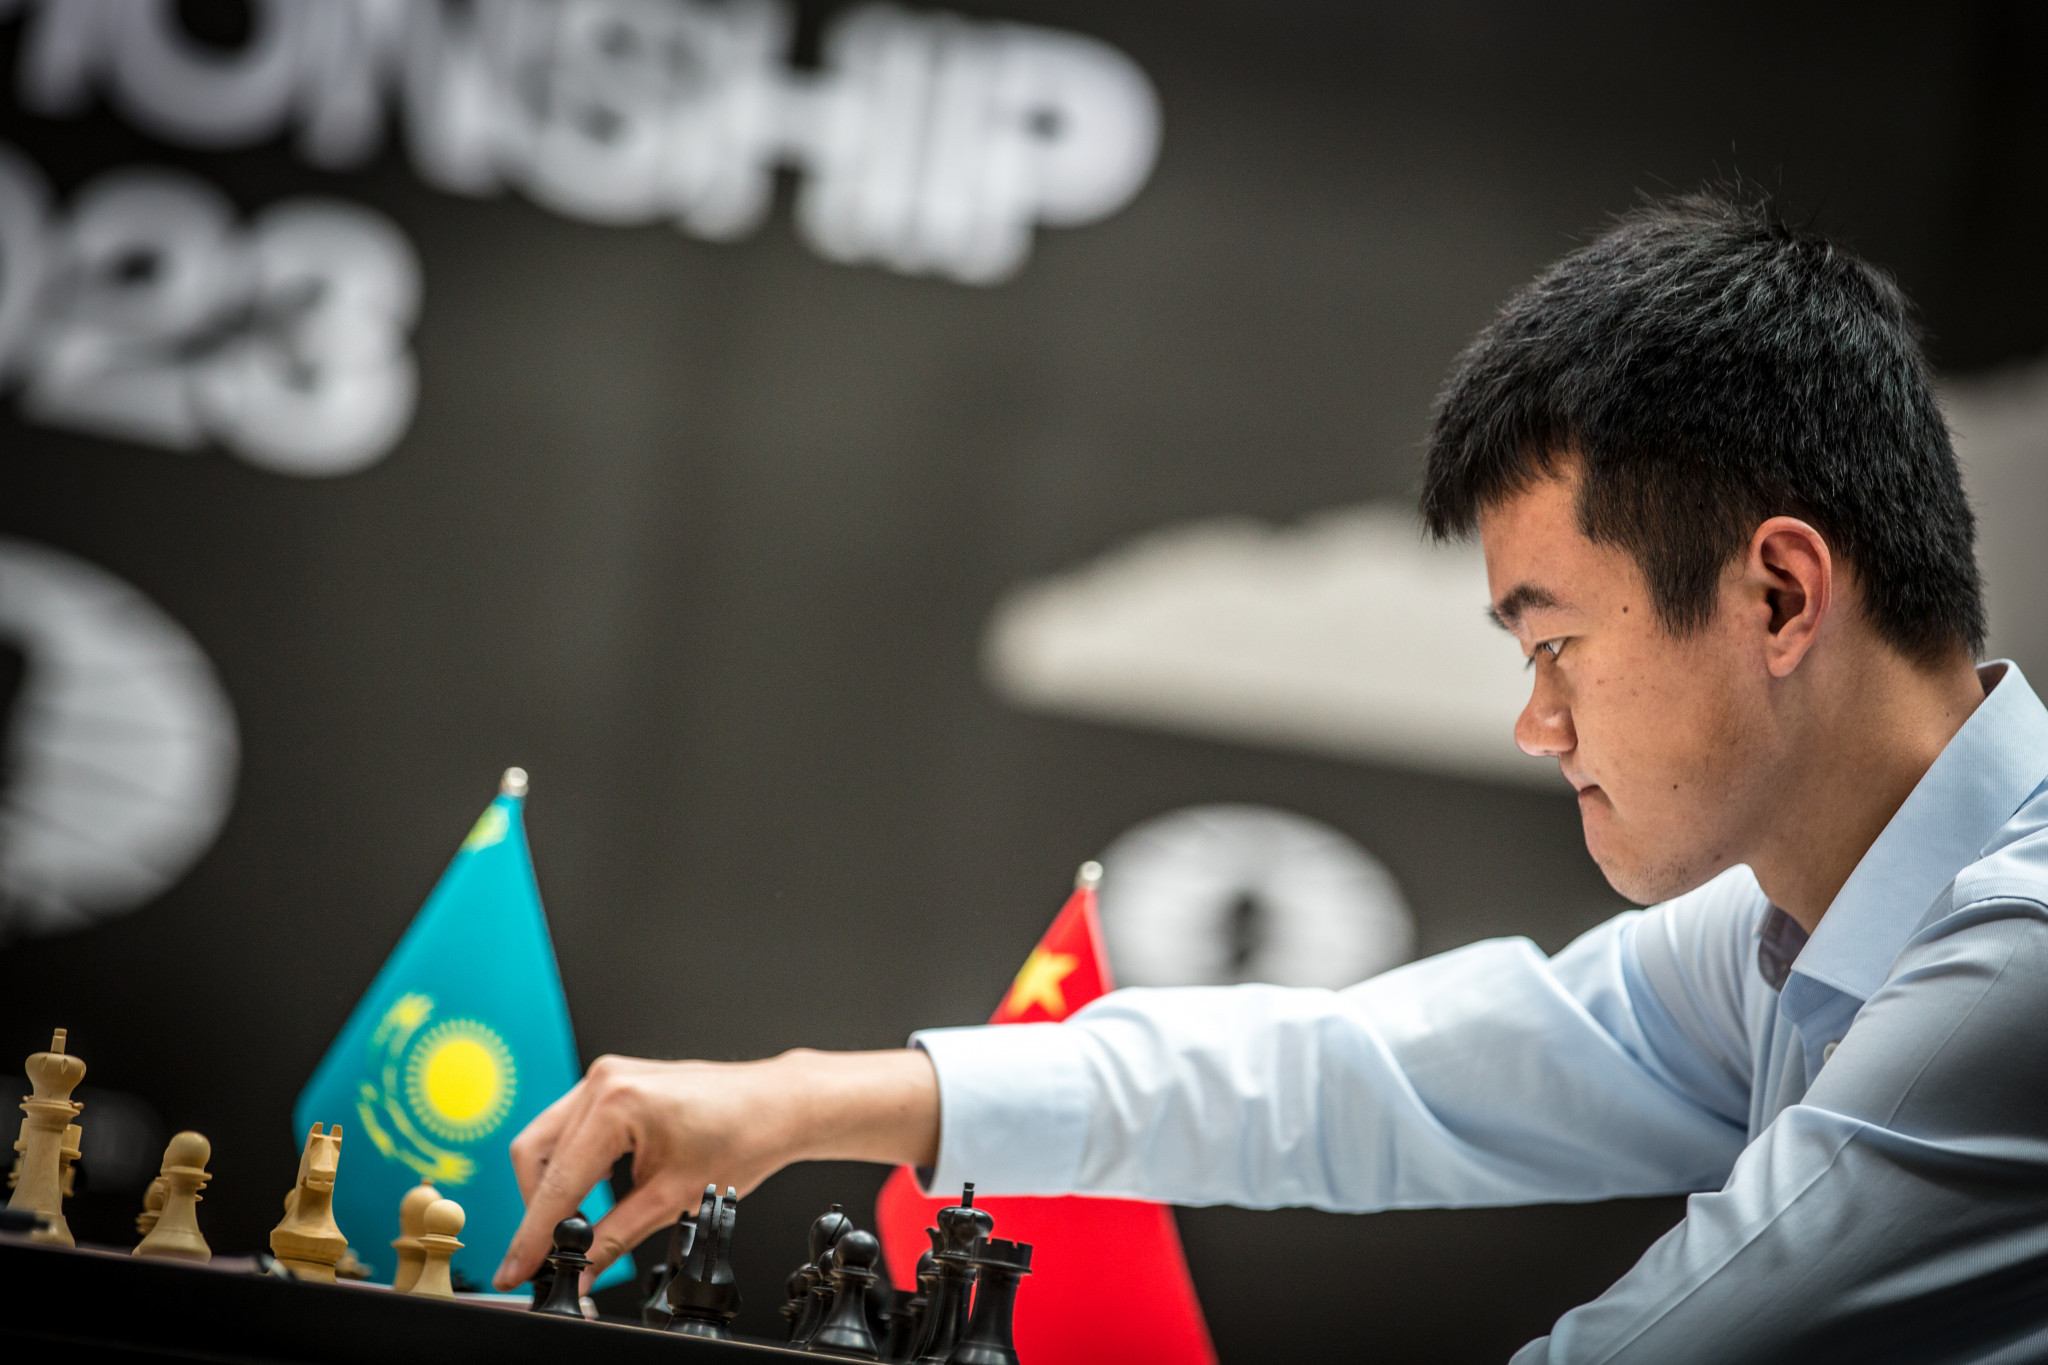 China's Ding Liren was in the ascendancy going into midgame, but hung on for a draw ©FIDE/Anna Shtourman